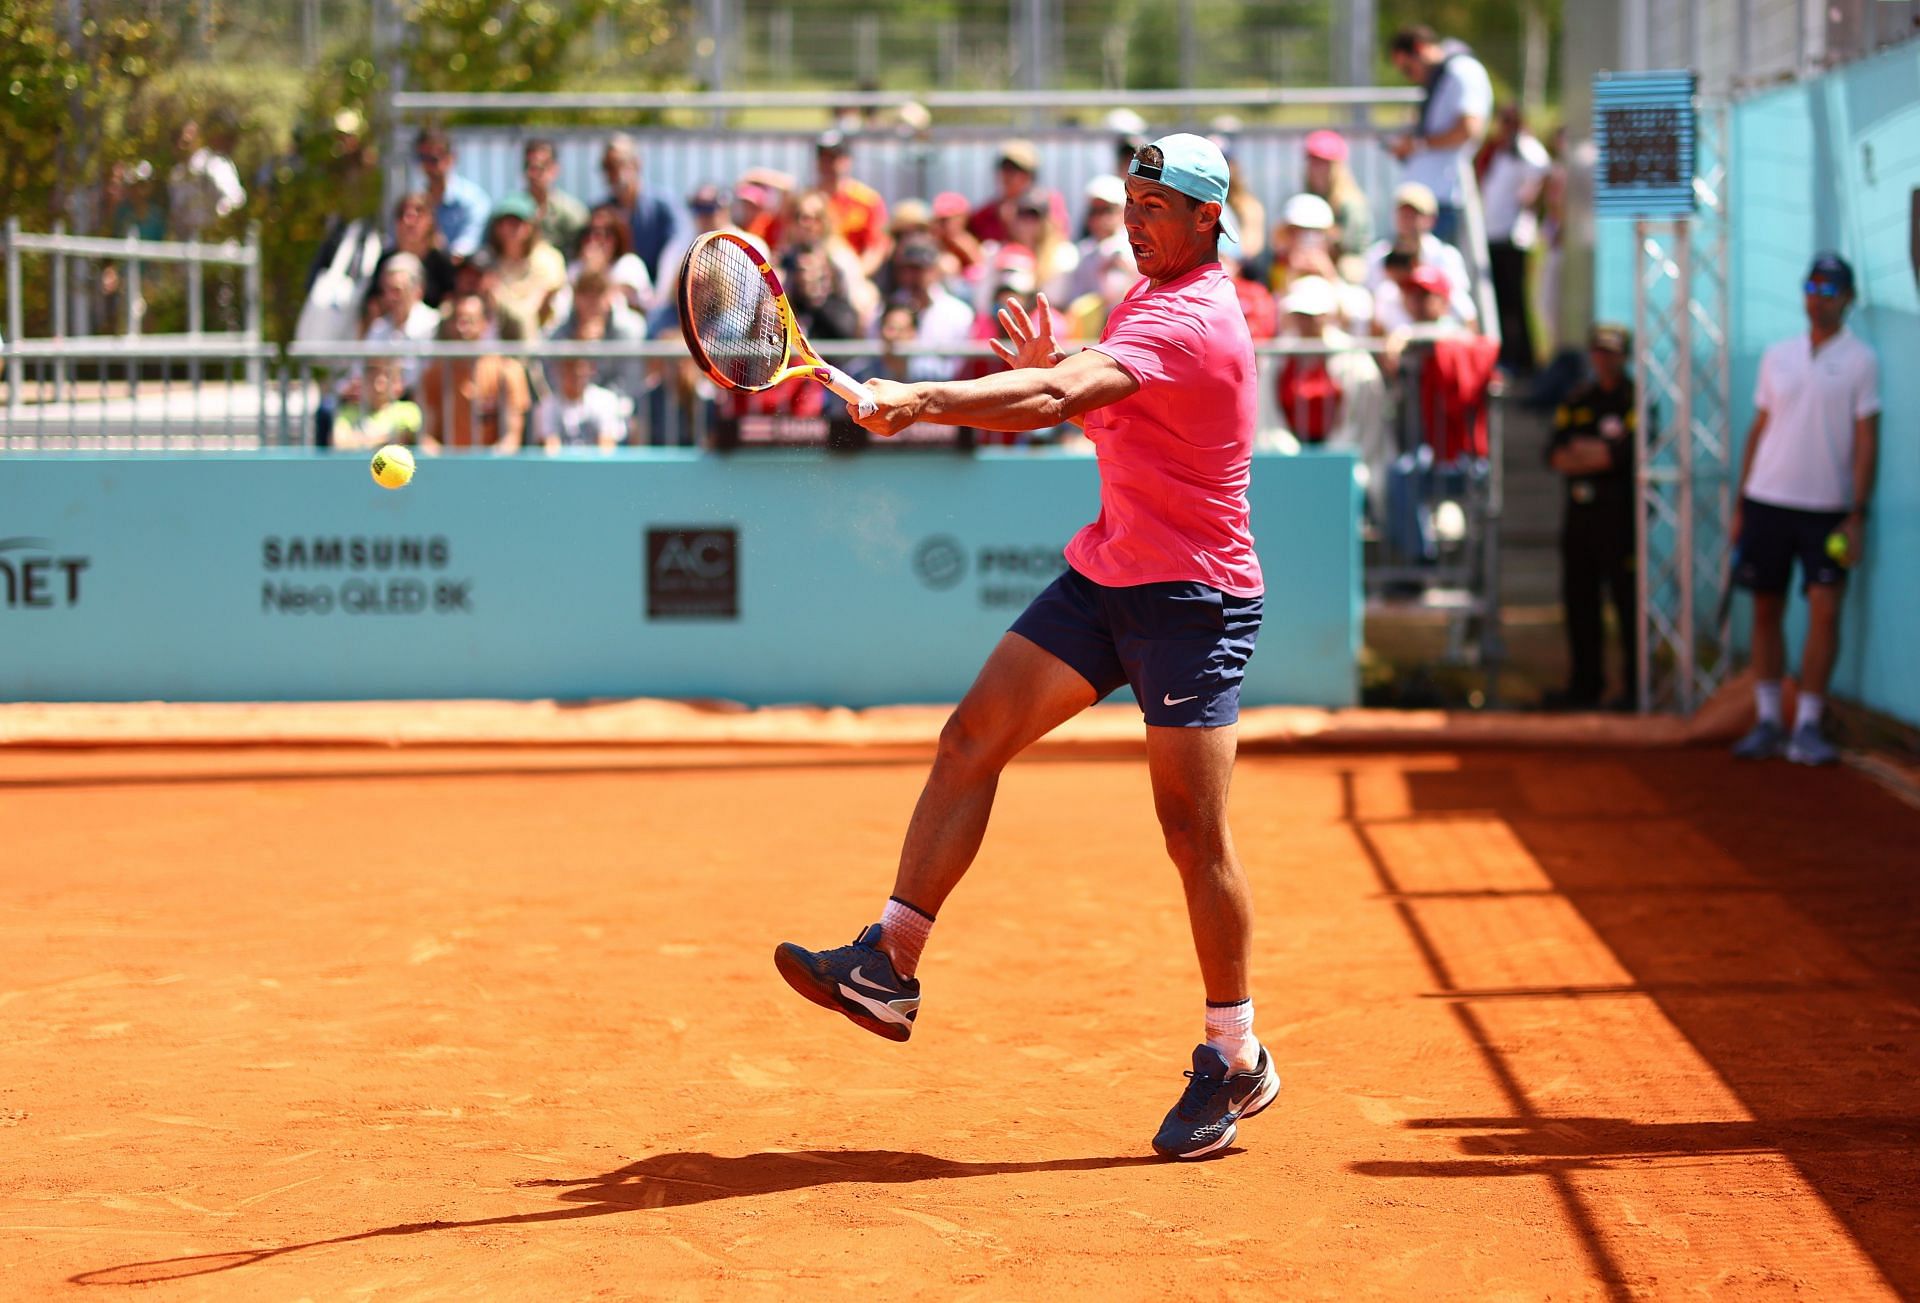 Rafael Nadal strikes a forehand during practice in Madrid.